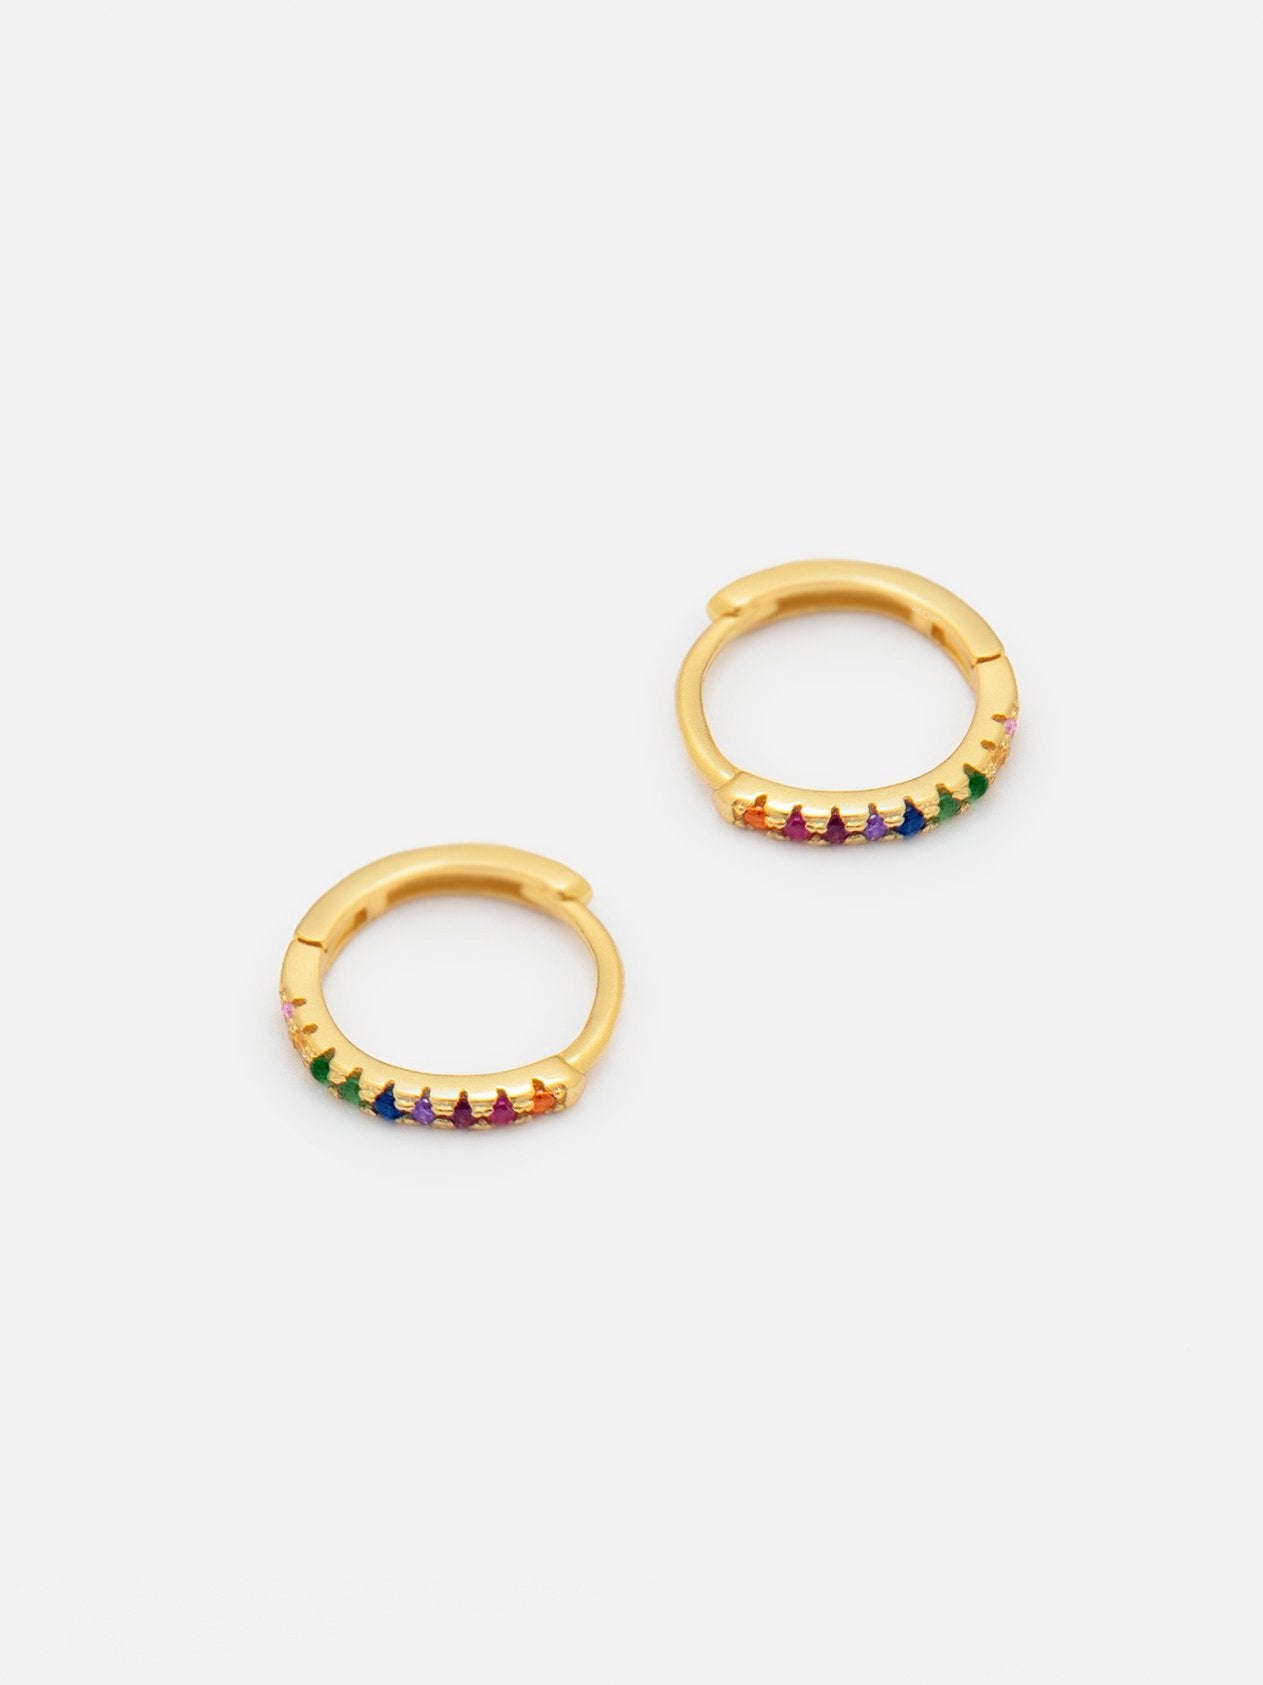 Gold Rainbow Hoop Earrings With Colourful Stones (18ct Gold Plated 925 Sterling Silver) - Muchv Jewellery